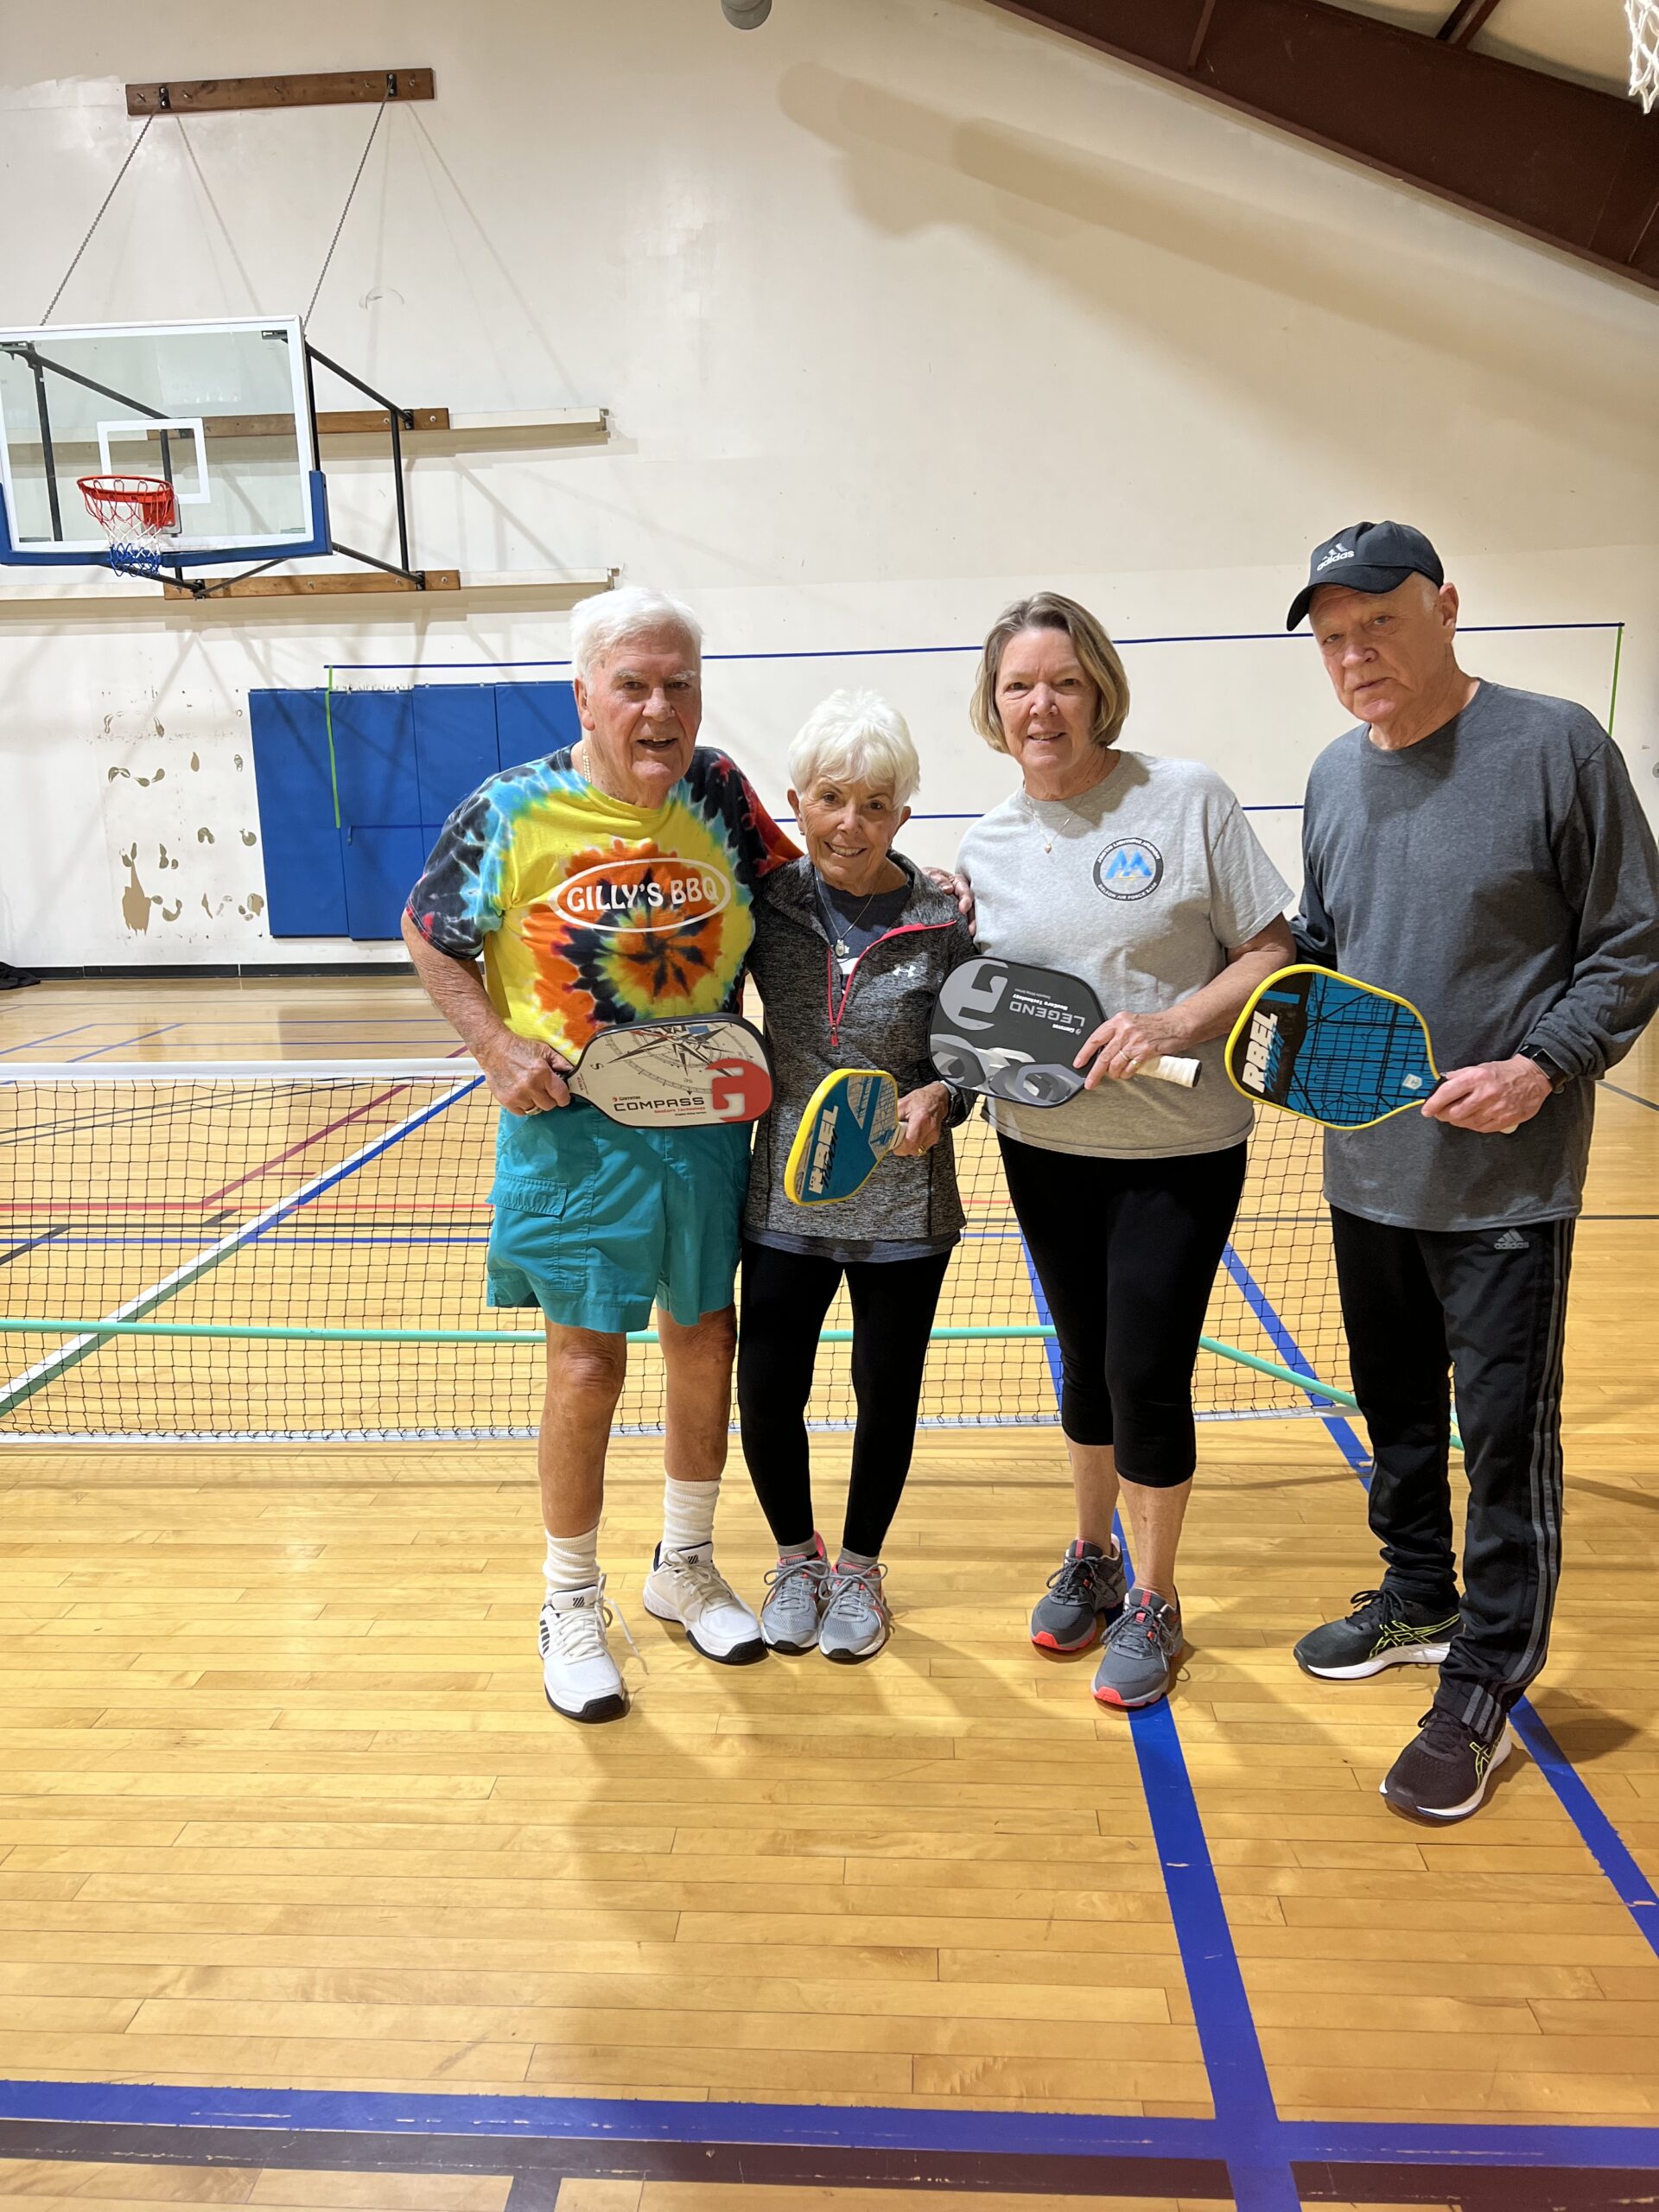 Carla Frank Ivers ’69 enjoyed a game of pickleball with Don Taft ’54 for his 90th birthday. Joining them were Jan Guiffre Sables ’62 and Carla’s husband Doug ’68. Wishing you the best on this exciting milestone!